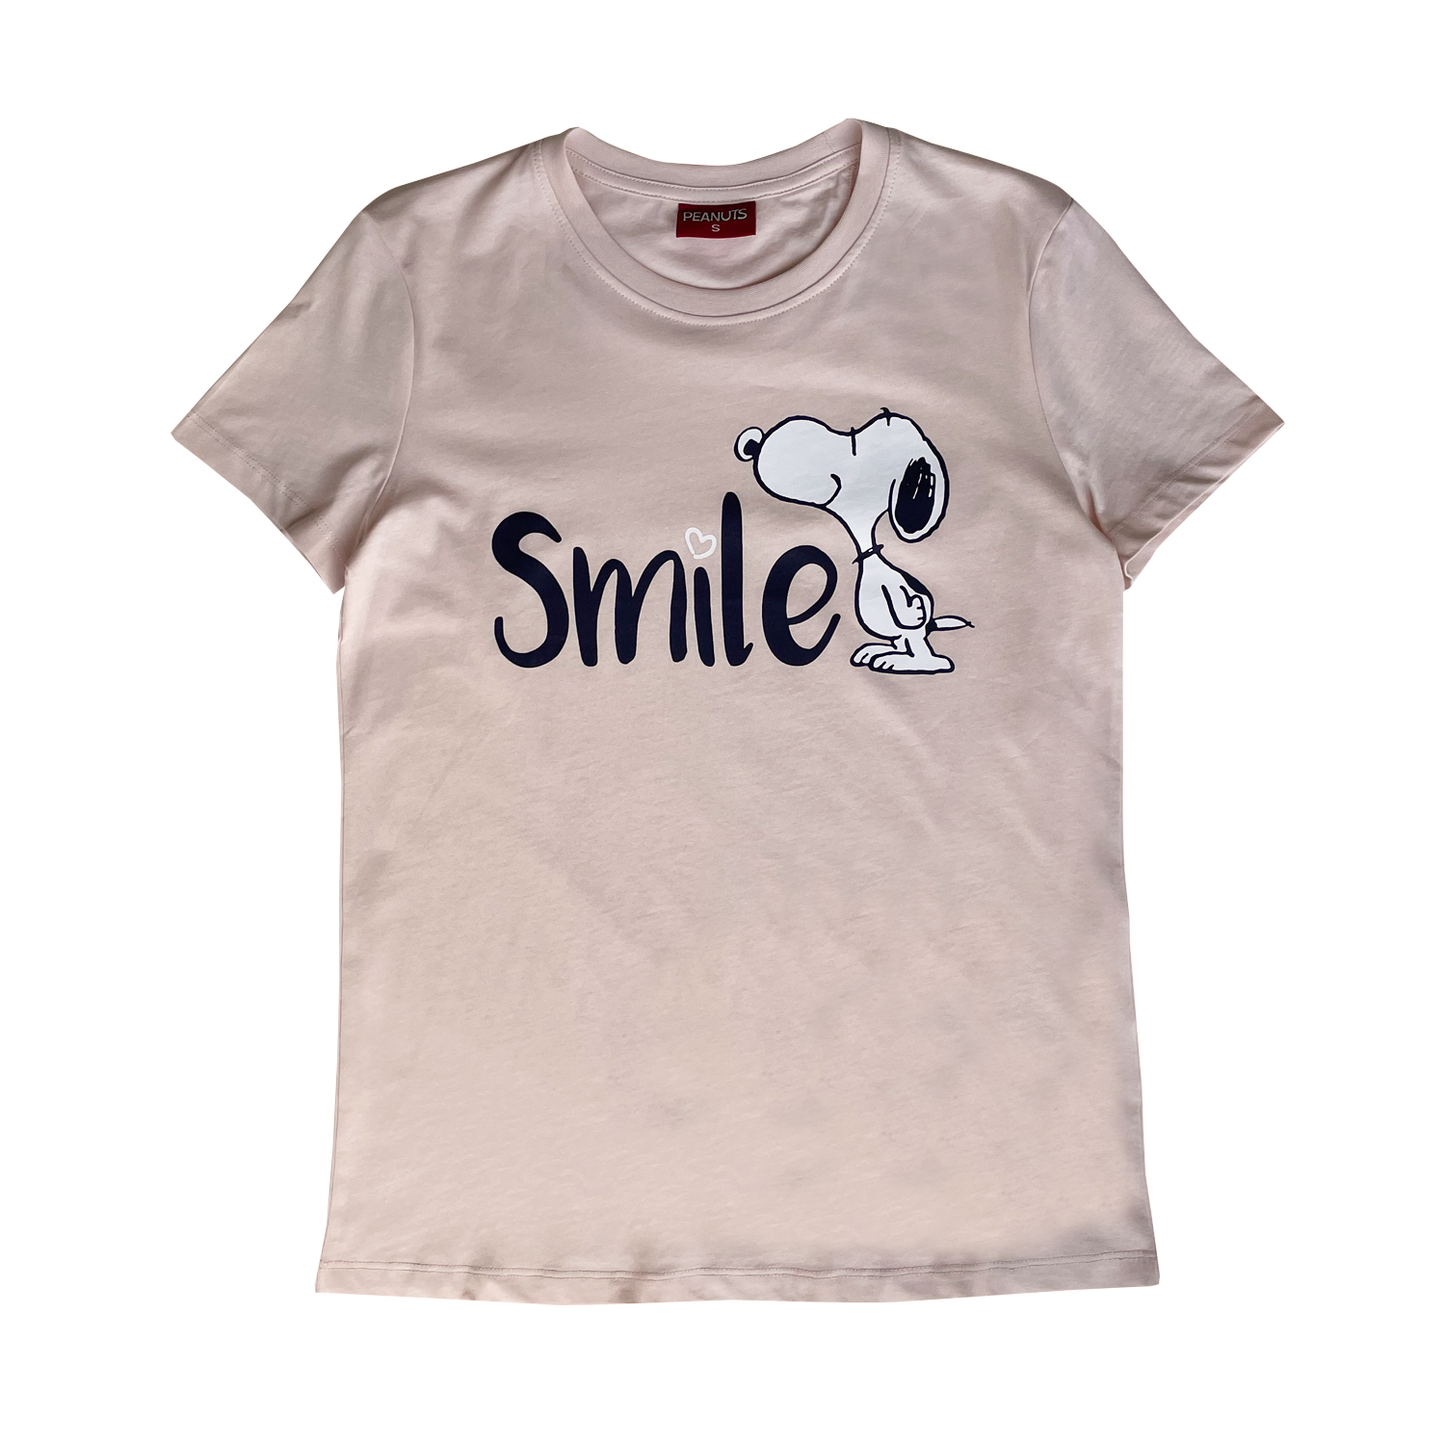 Peanuts - Snoopy Smile T-Shirt –